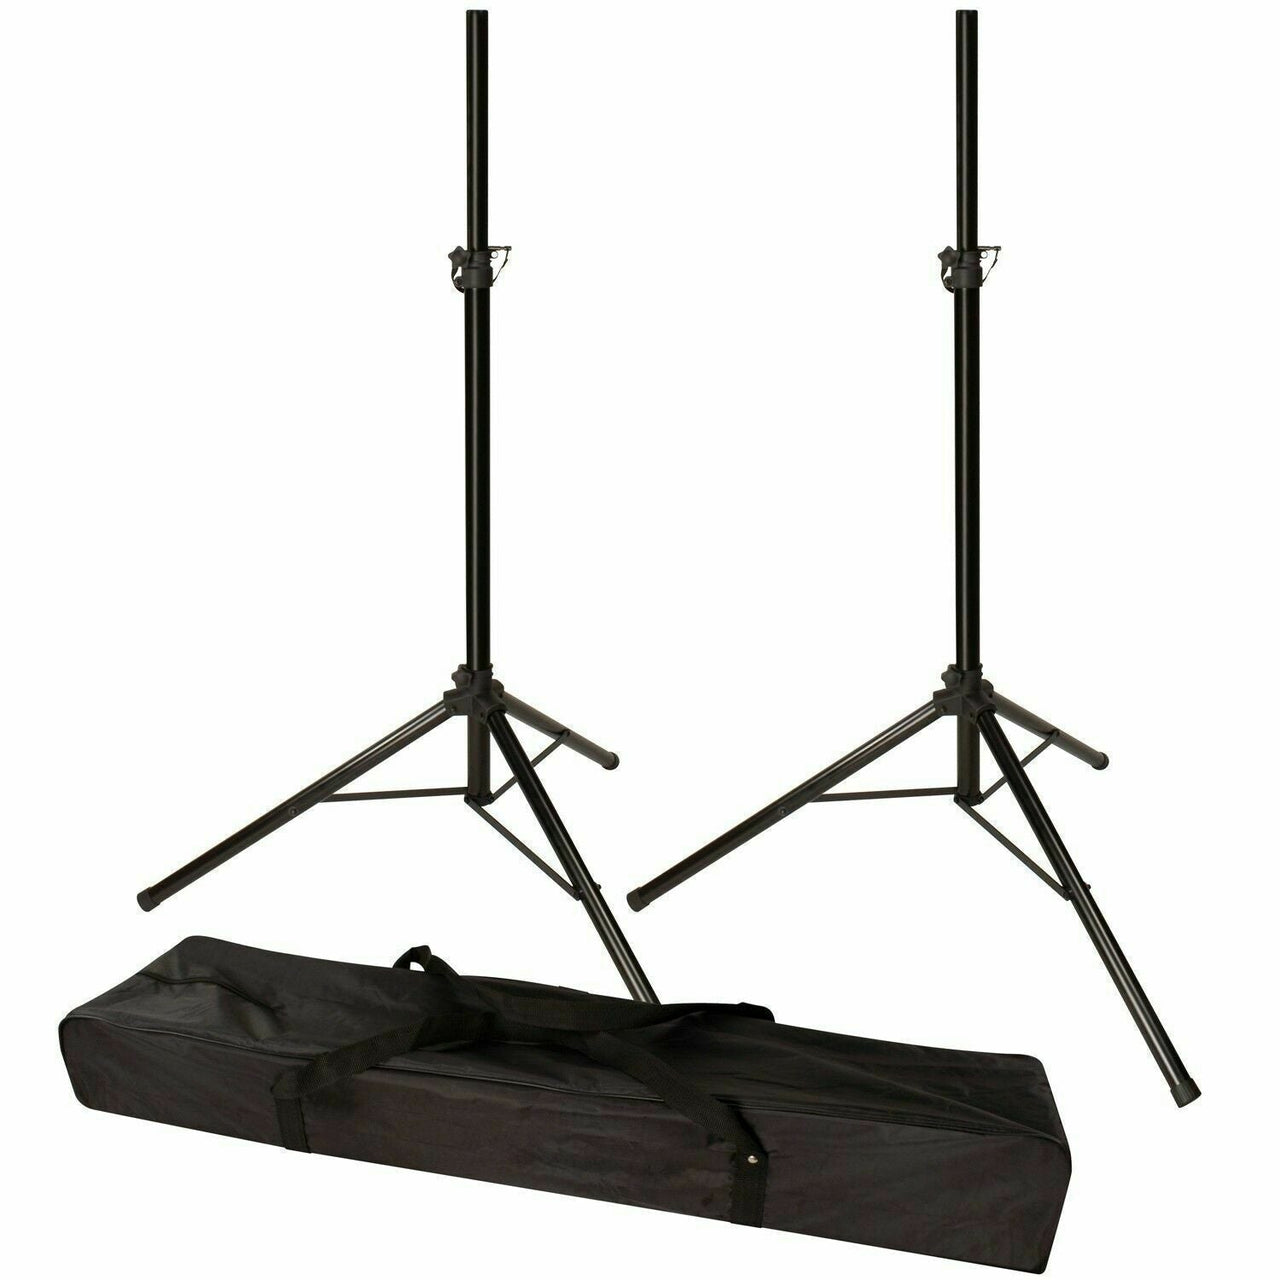 2 MR DJ SS300B Speaker Stand with Road Carrying Bag <br/> Universal Black Heavy Duty Folding Tripod PRO PA DJ Home On Stage Speaker Stand Mount Holder with Road Carrying Bag